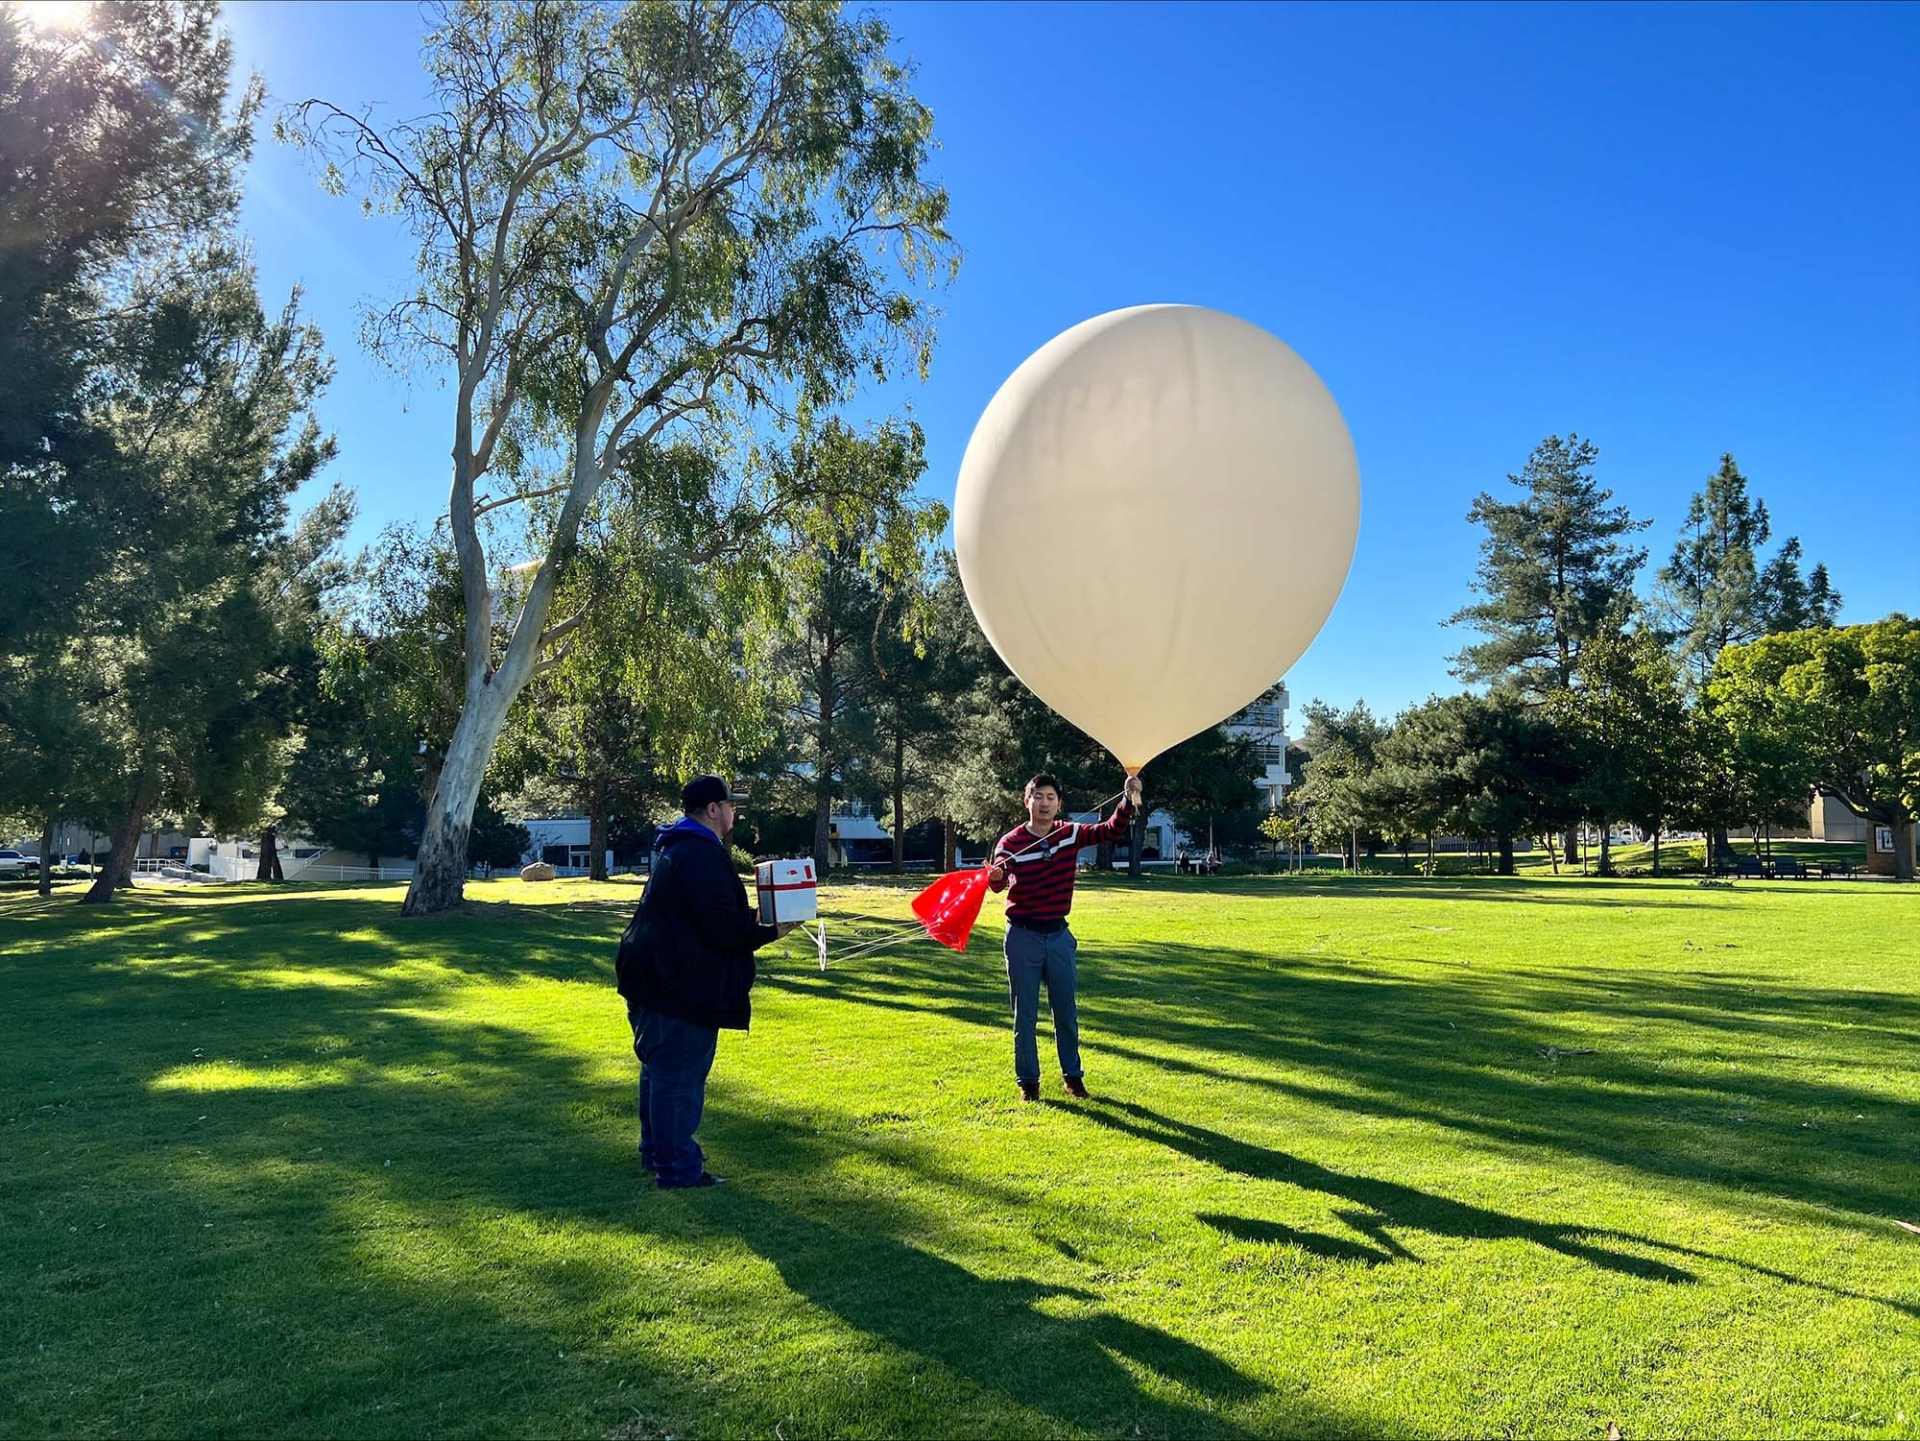 An ozonesonde balloon is readied for launch from the lawn next to the Chemical Sciences building on the CSUSB campus.